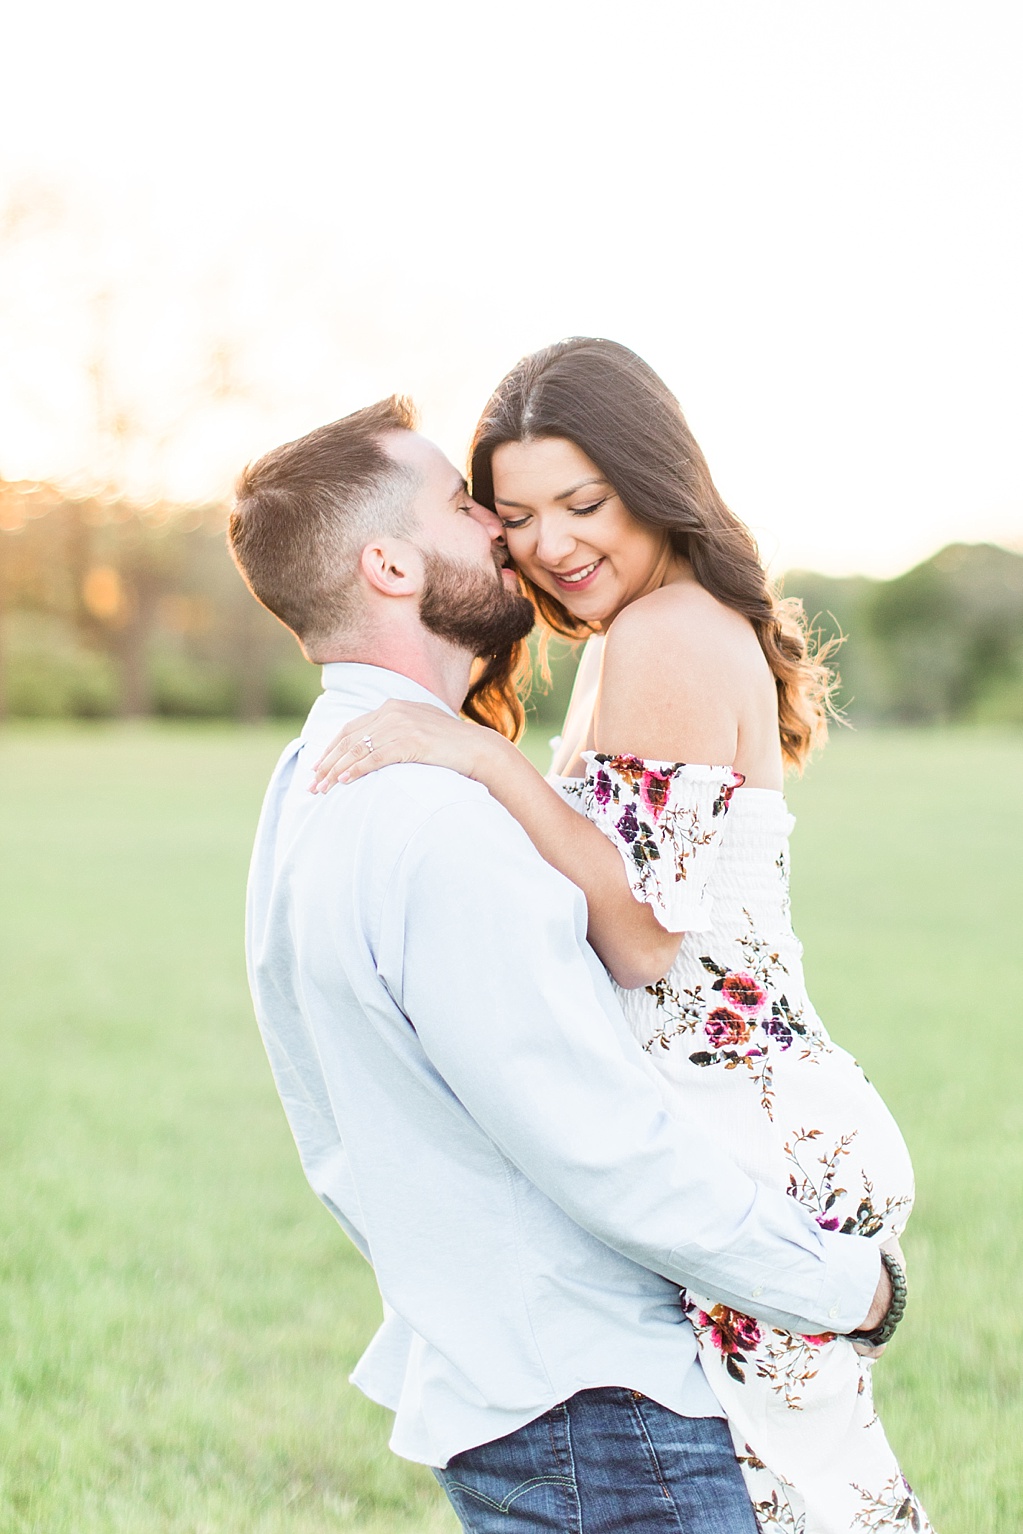 Eagle Dancer Ranch Engagement Photo Session in Boerne, Texas by Allison Jeffers Photography 0050